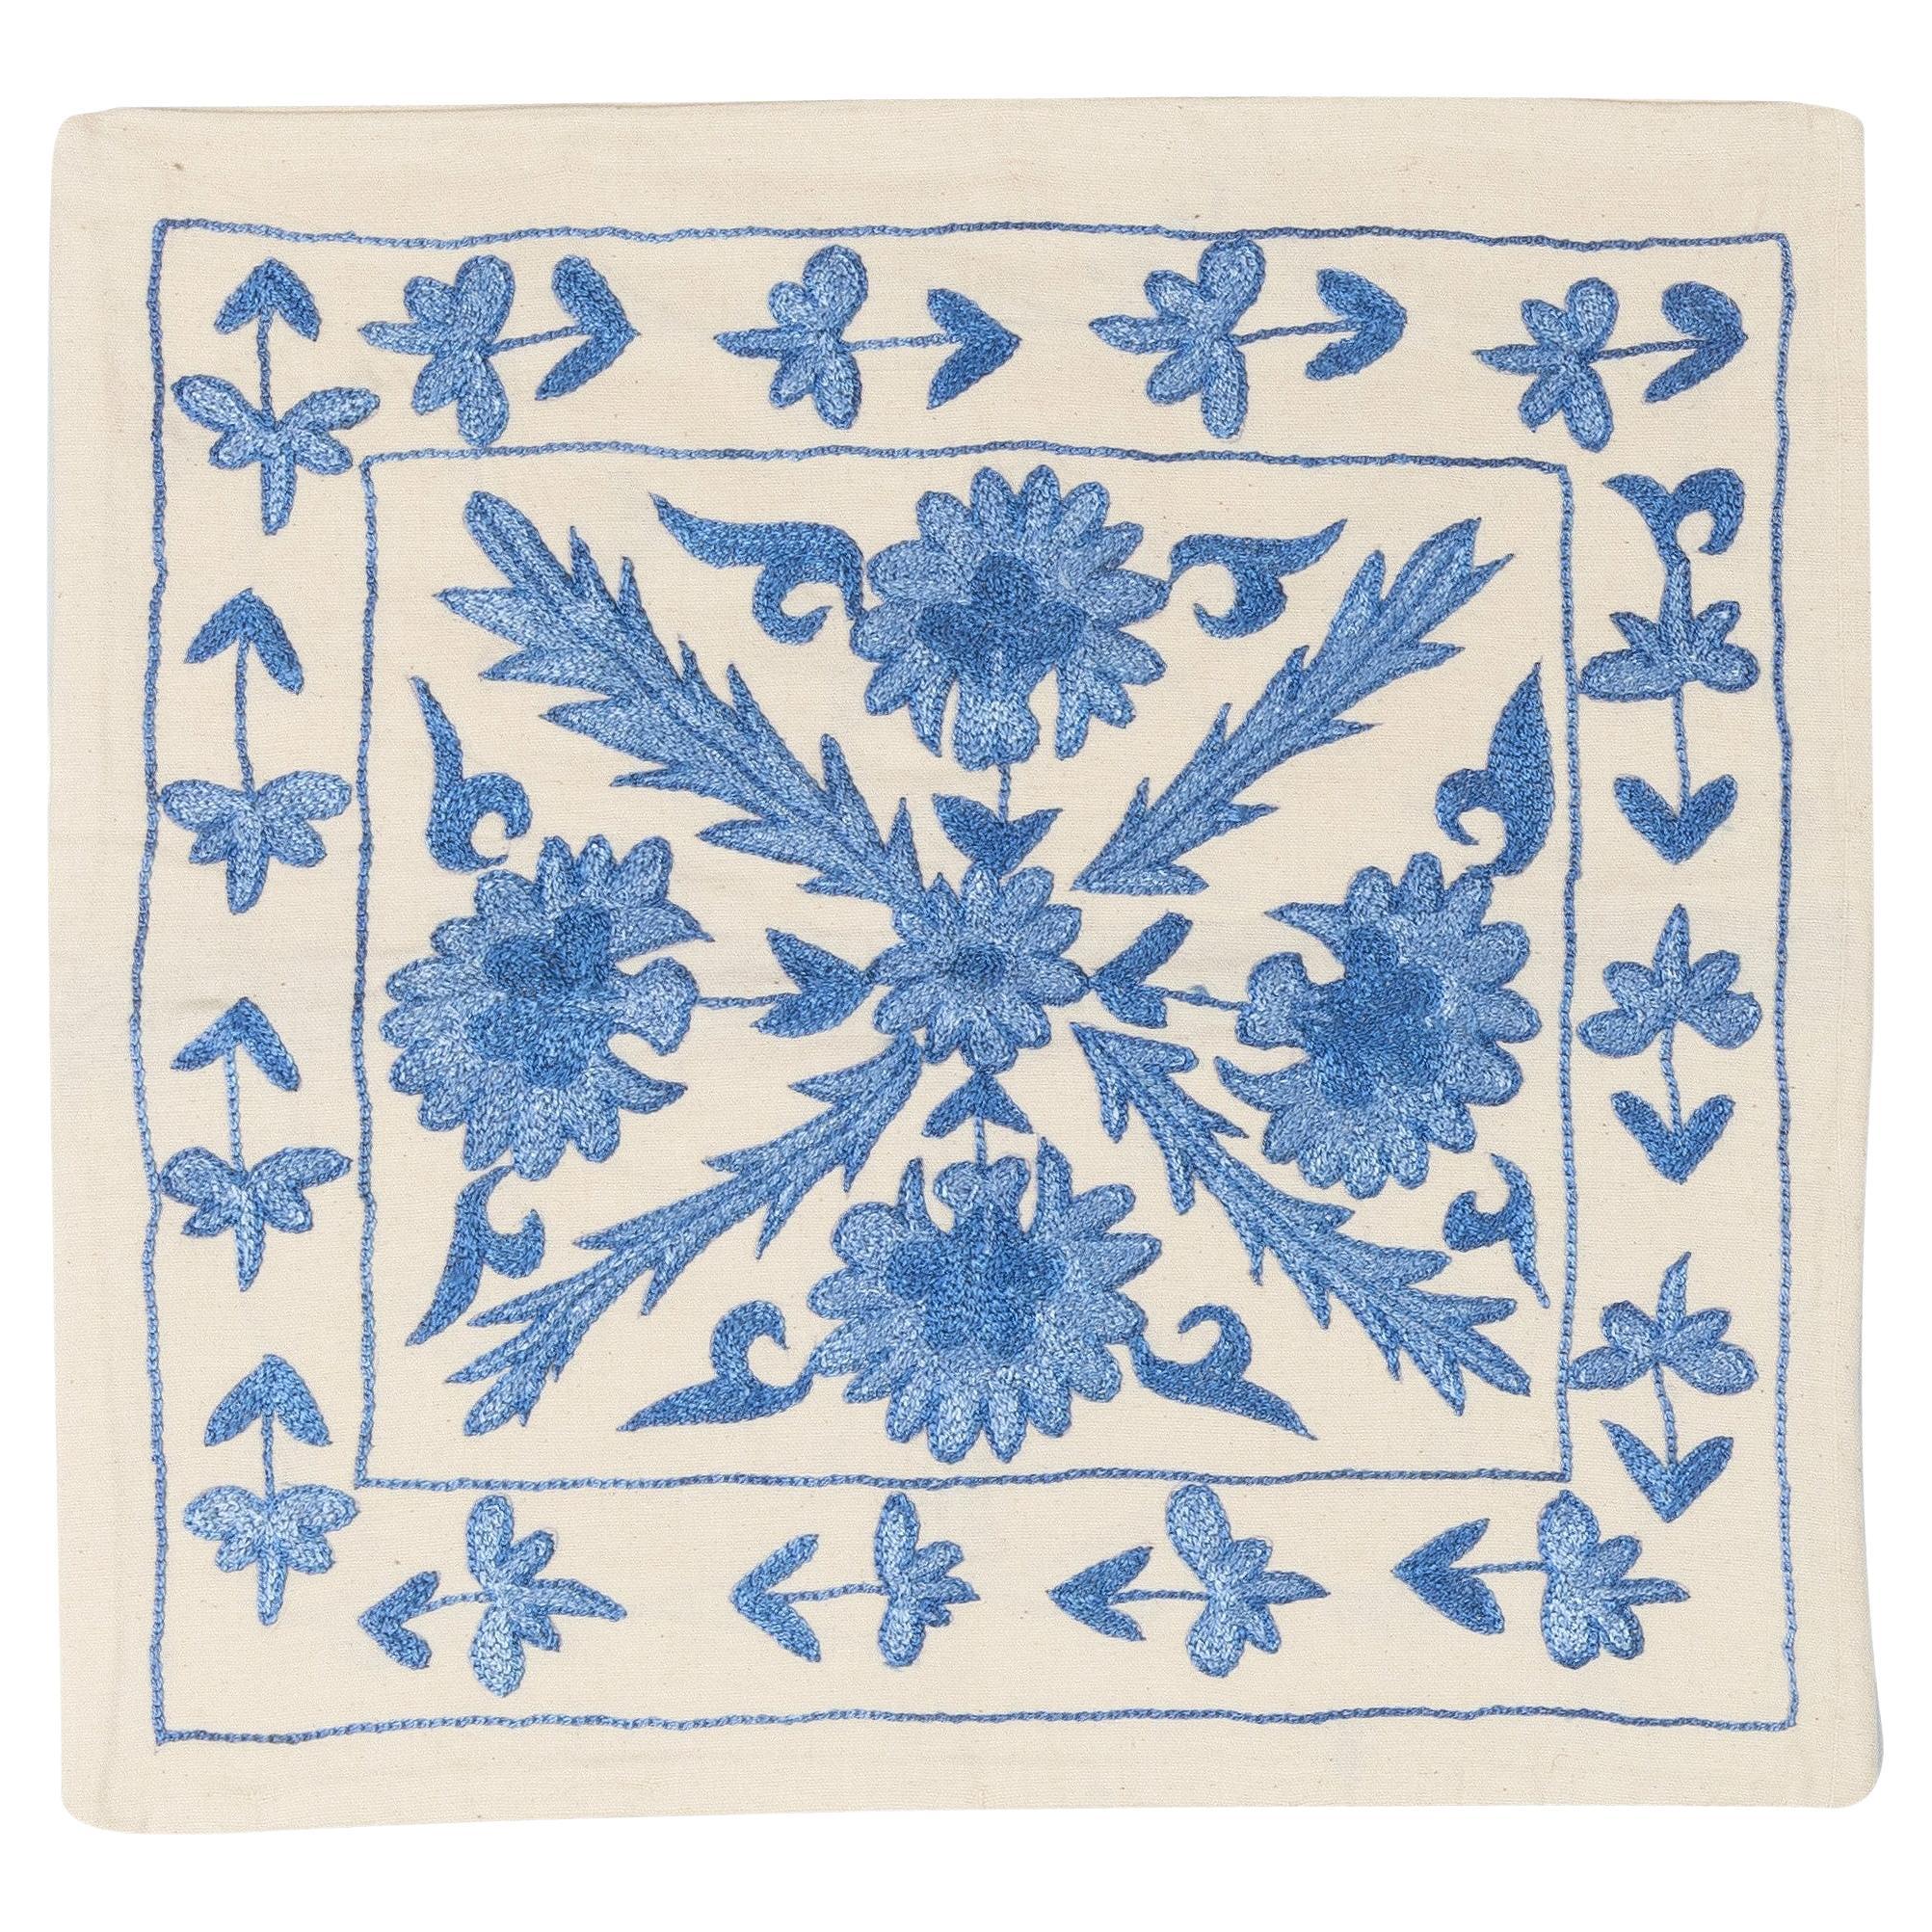 19"x19" Floral Patterned Silk Embroidered Suzani Cushion Cover in Blue and Cream For Sale